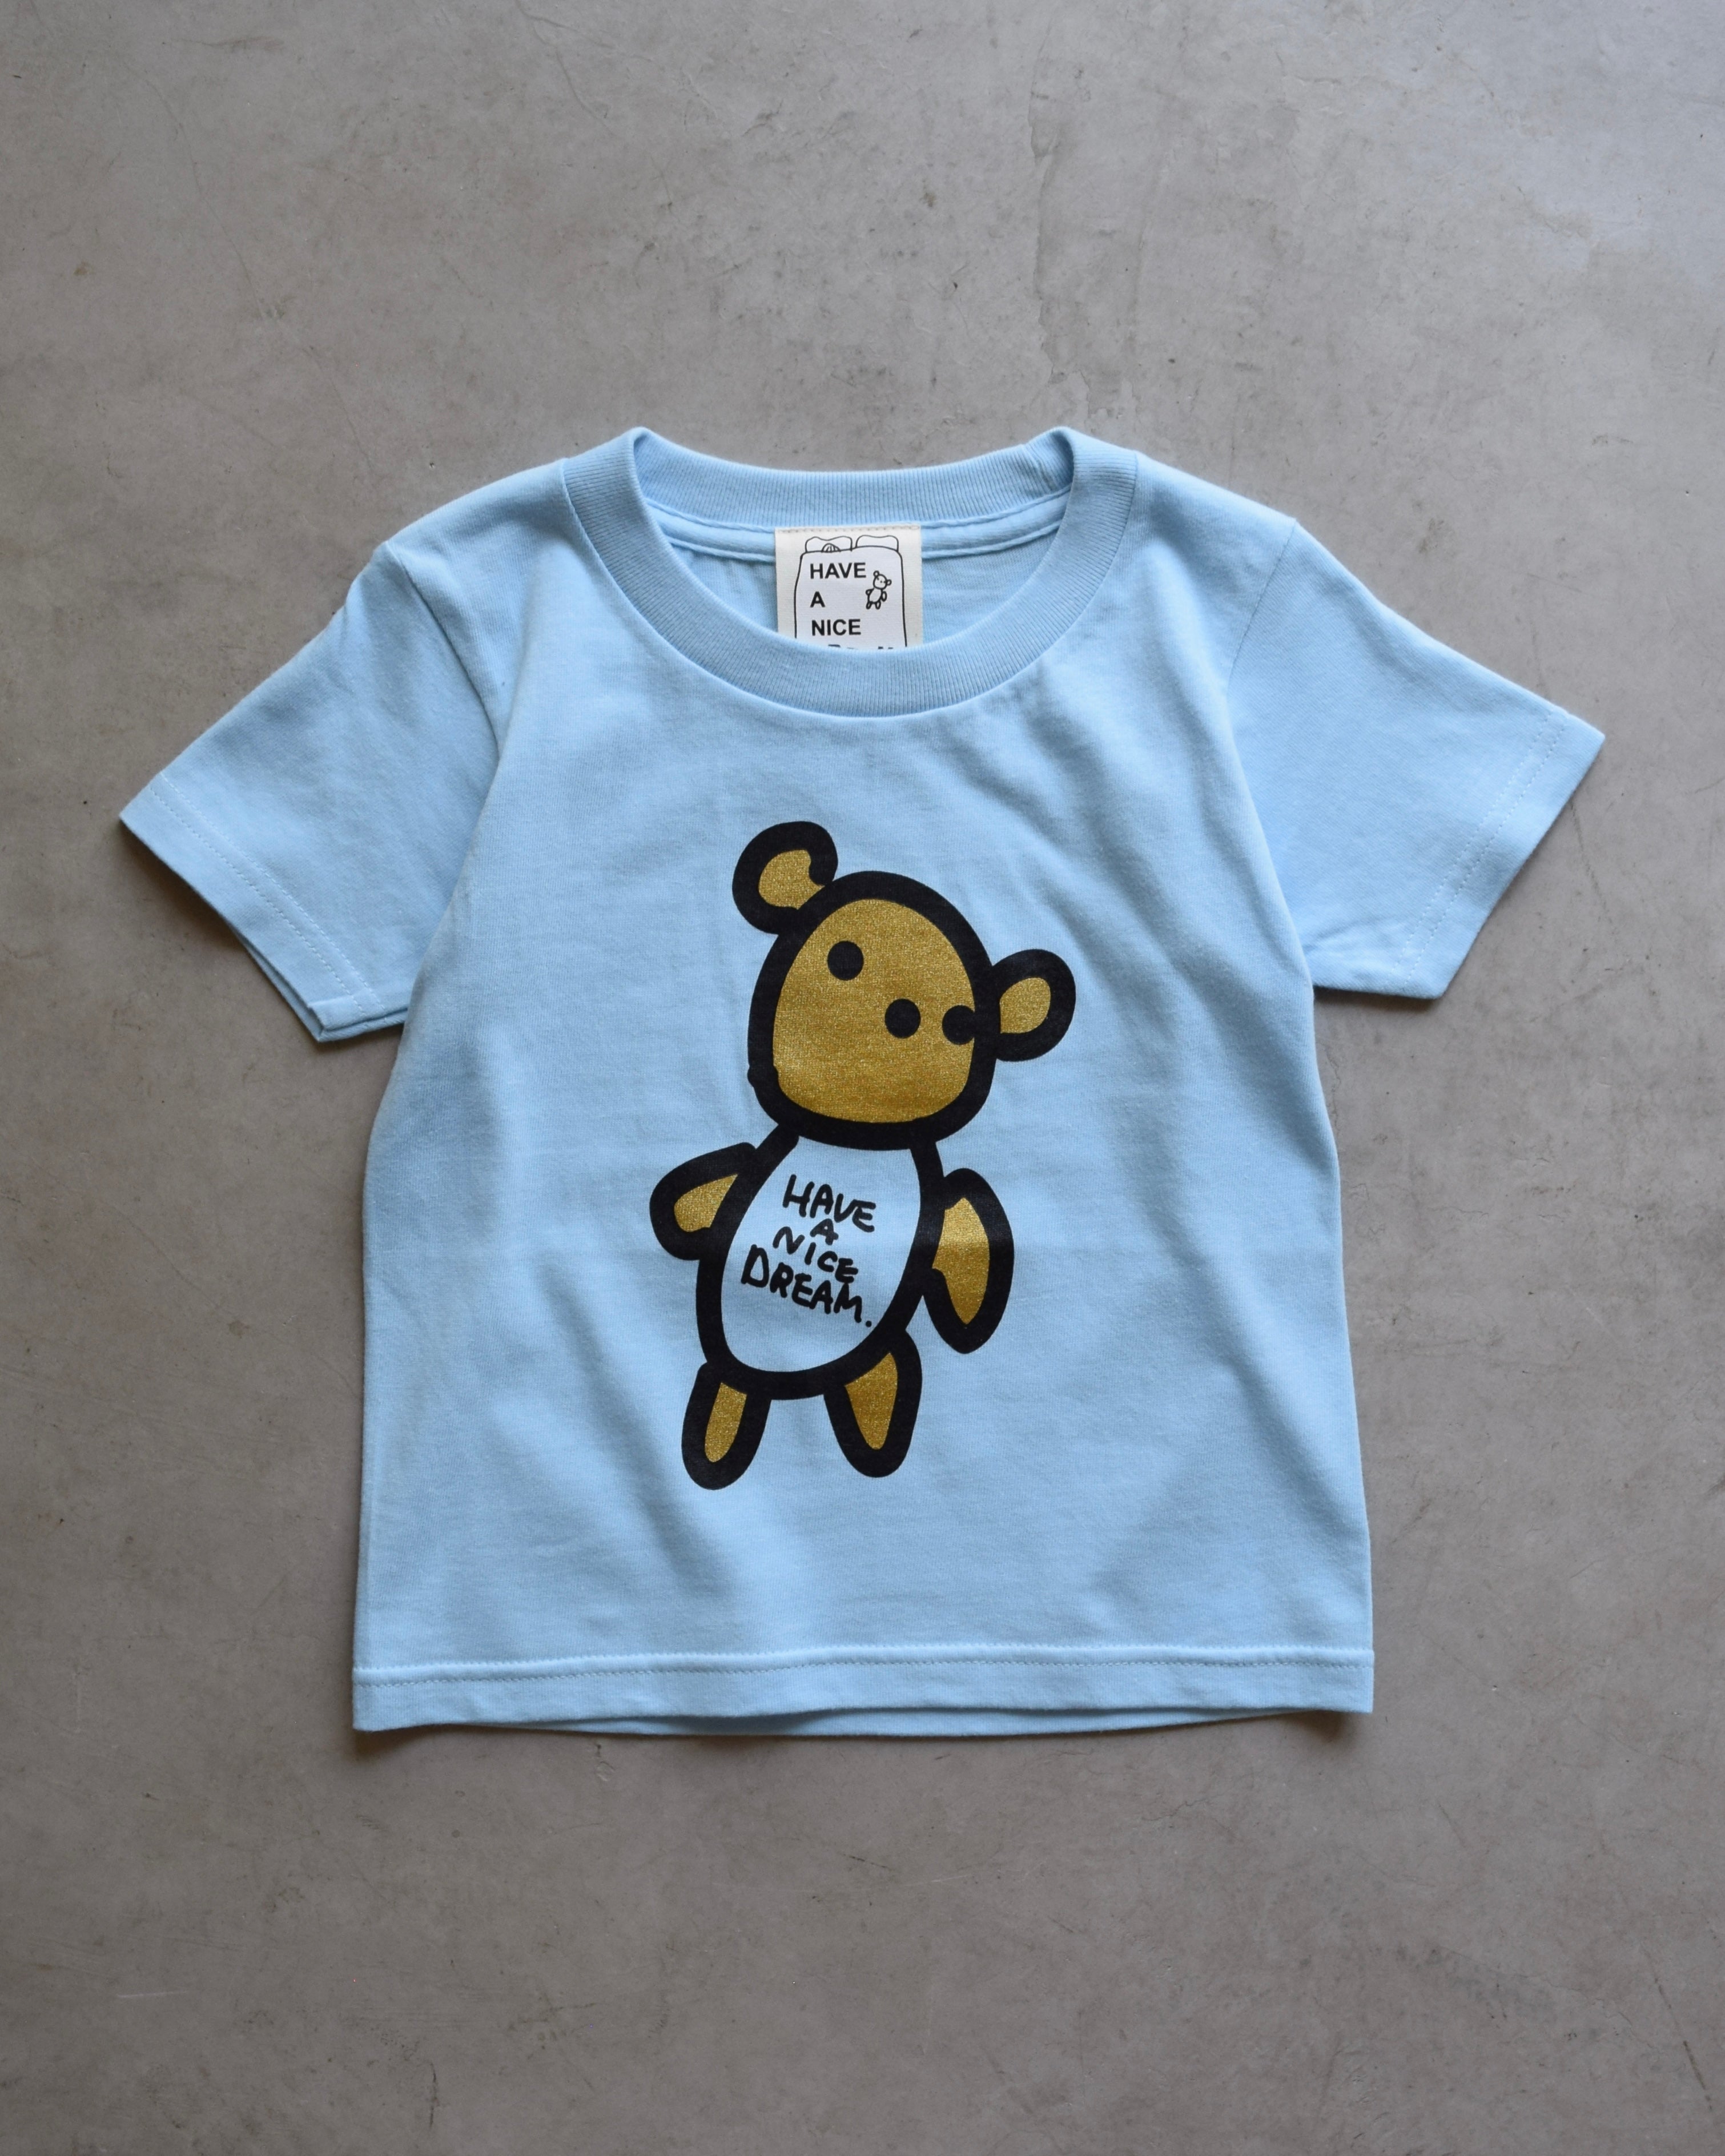 TODAY edition / #02 SS Tee - BLUE [KIDS]